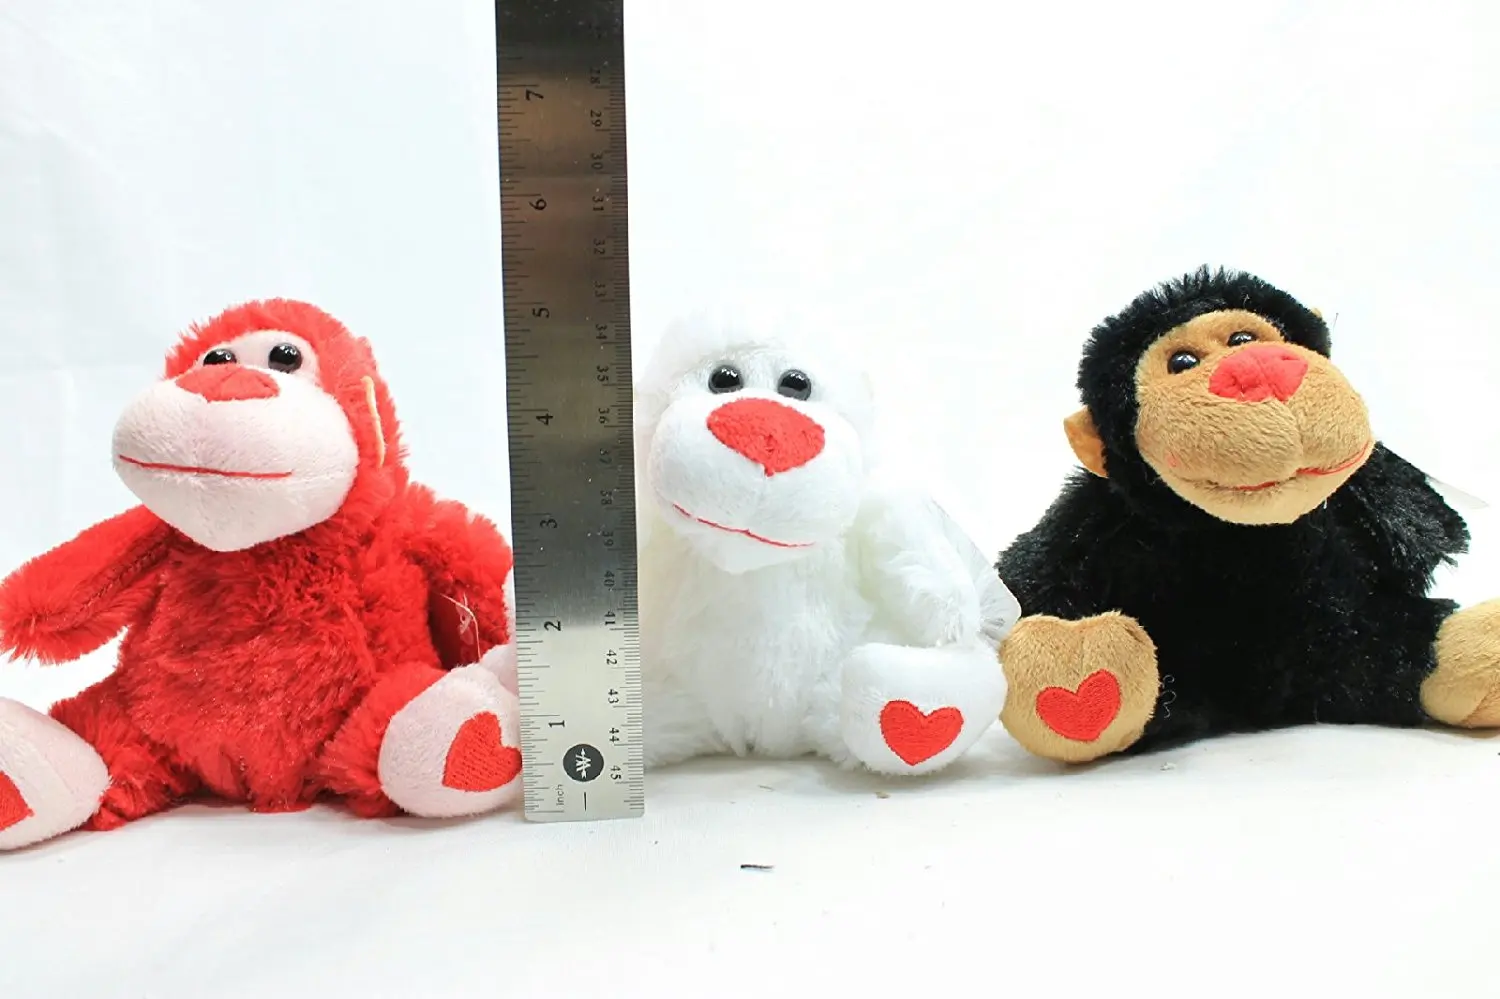 No Sew Make Your Own Stuffed Animal Kaledioscope Gorilla Kit With Cute Backpack!